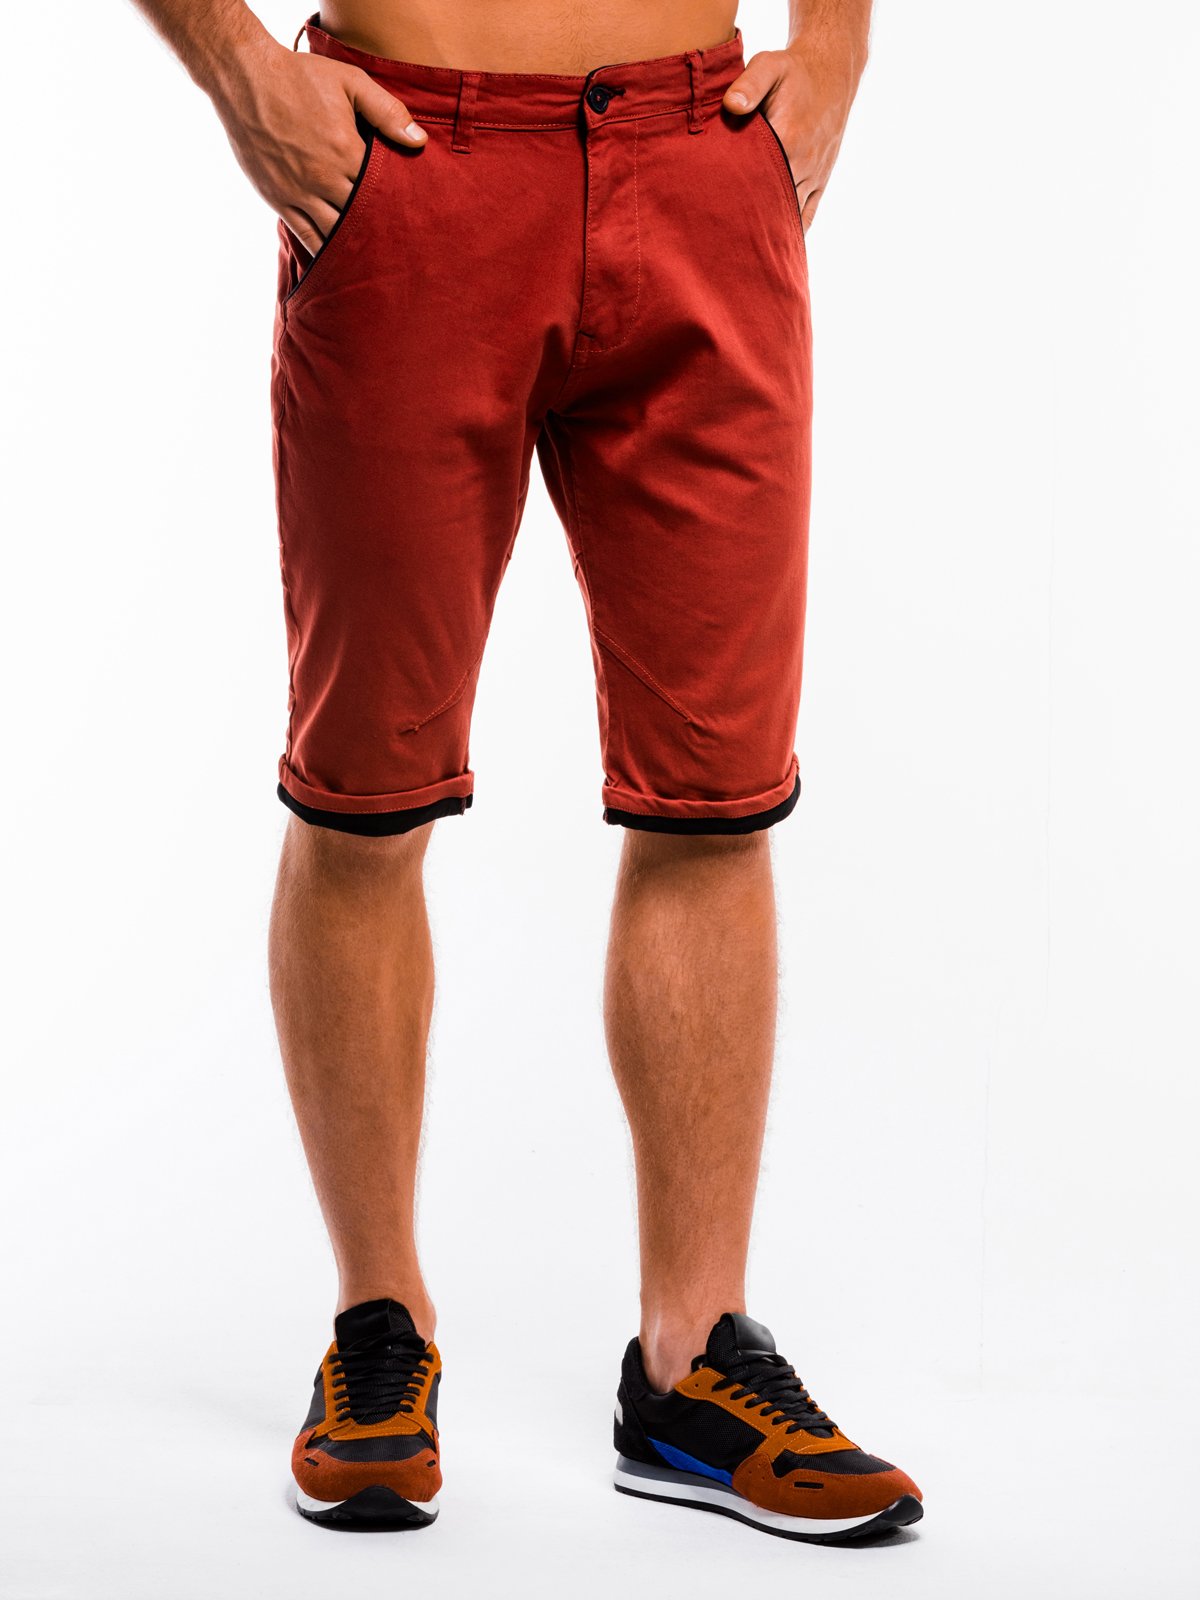 Men's chino shorts W150 - red | MODONE wholesale - Clothing For Men